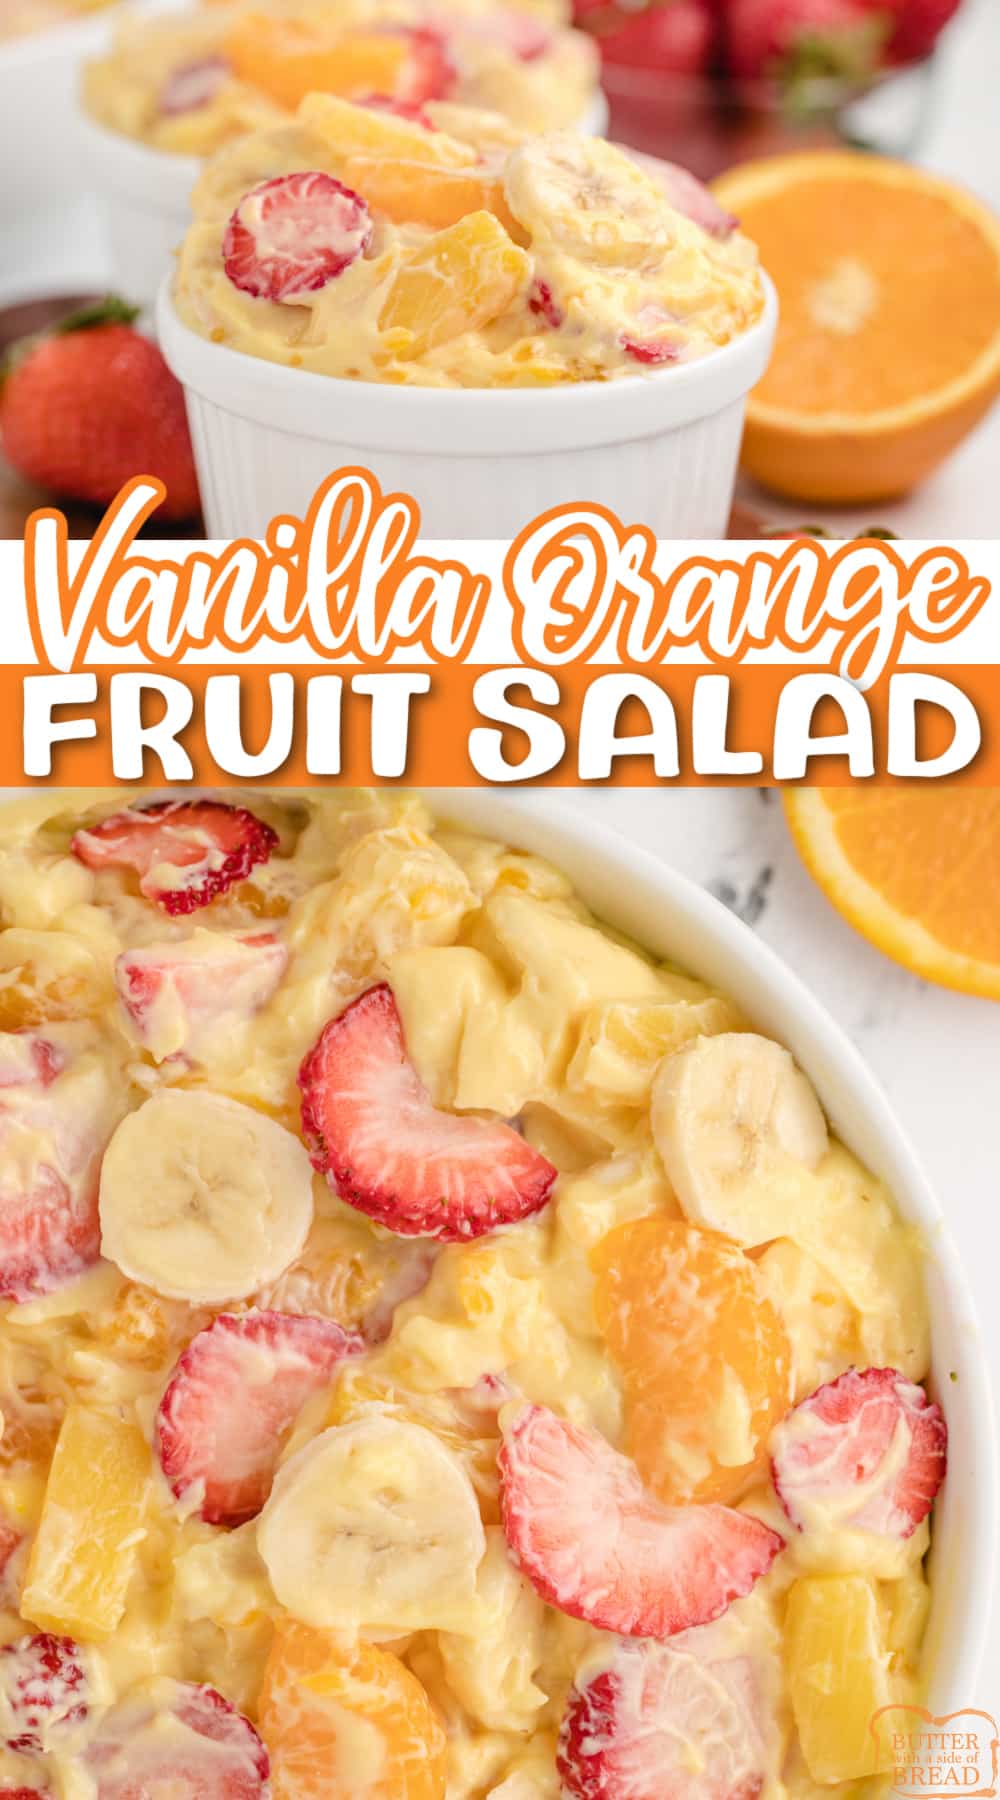 Vanilla Orange Fruit Salad is a simple fruit salad that makes the perfect side dish for any meal! This delicious fruit salad recipe is full of pineapple, oranges, strawberries and bananas coated with a vanilla pudding and yogurt glaze.